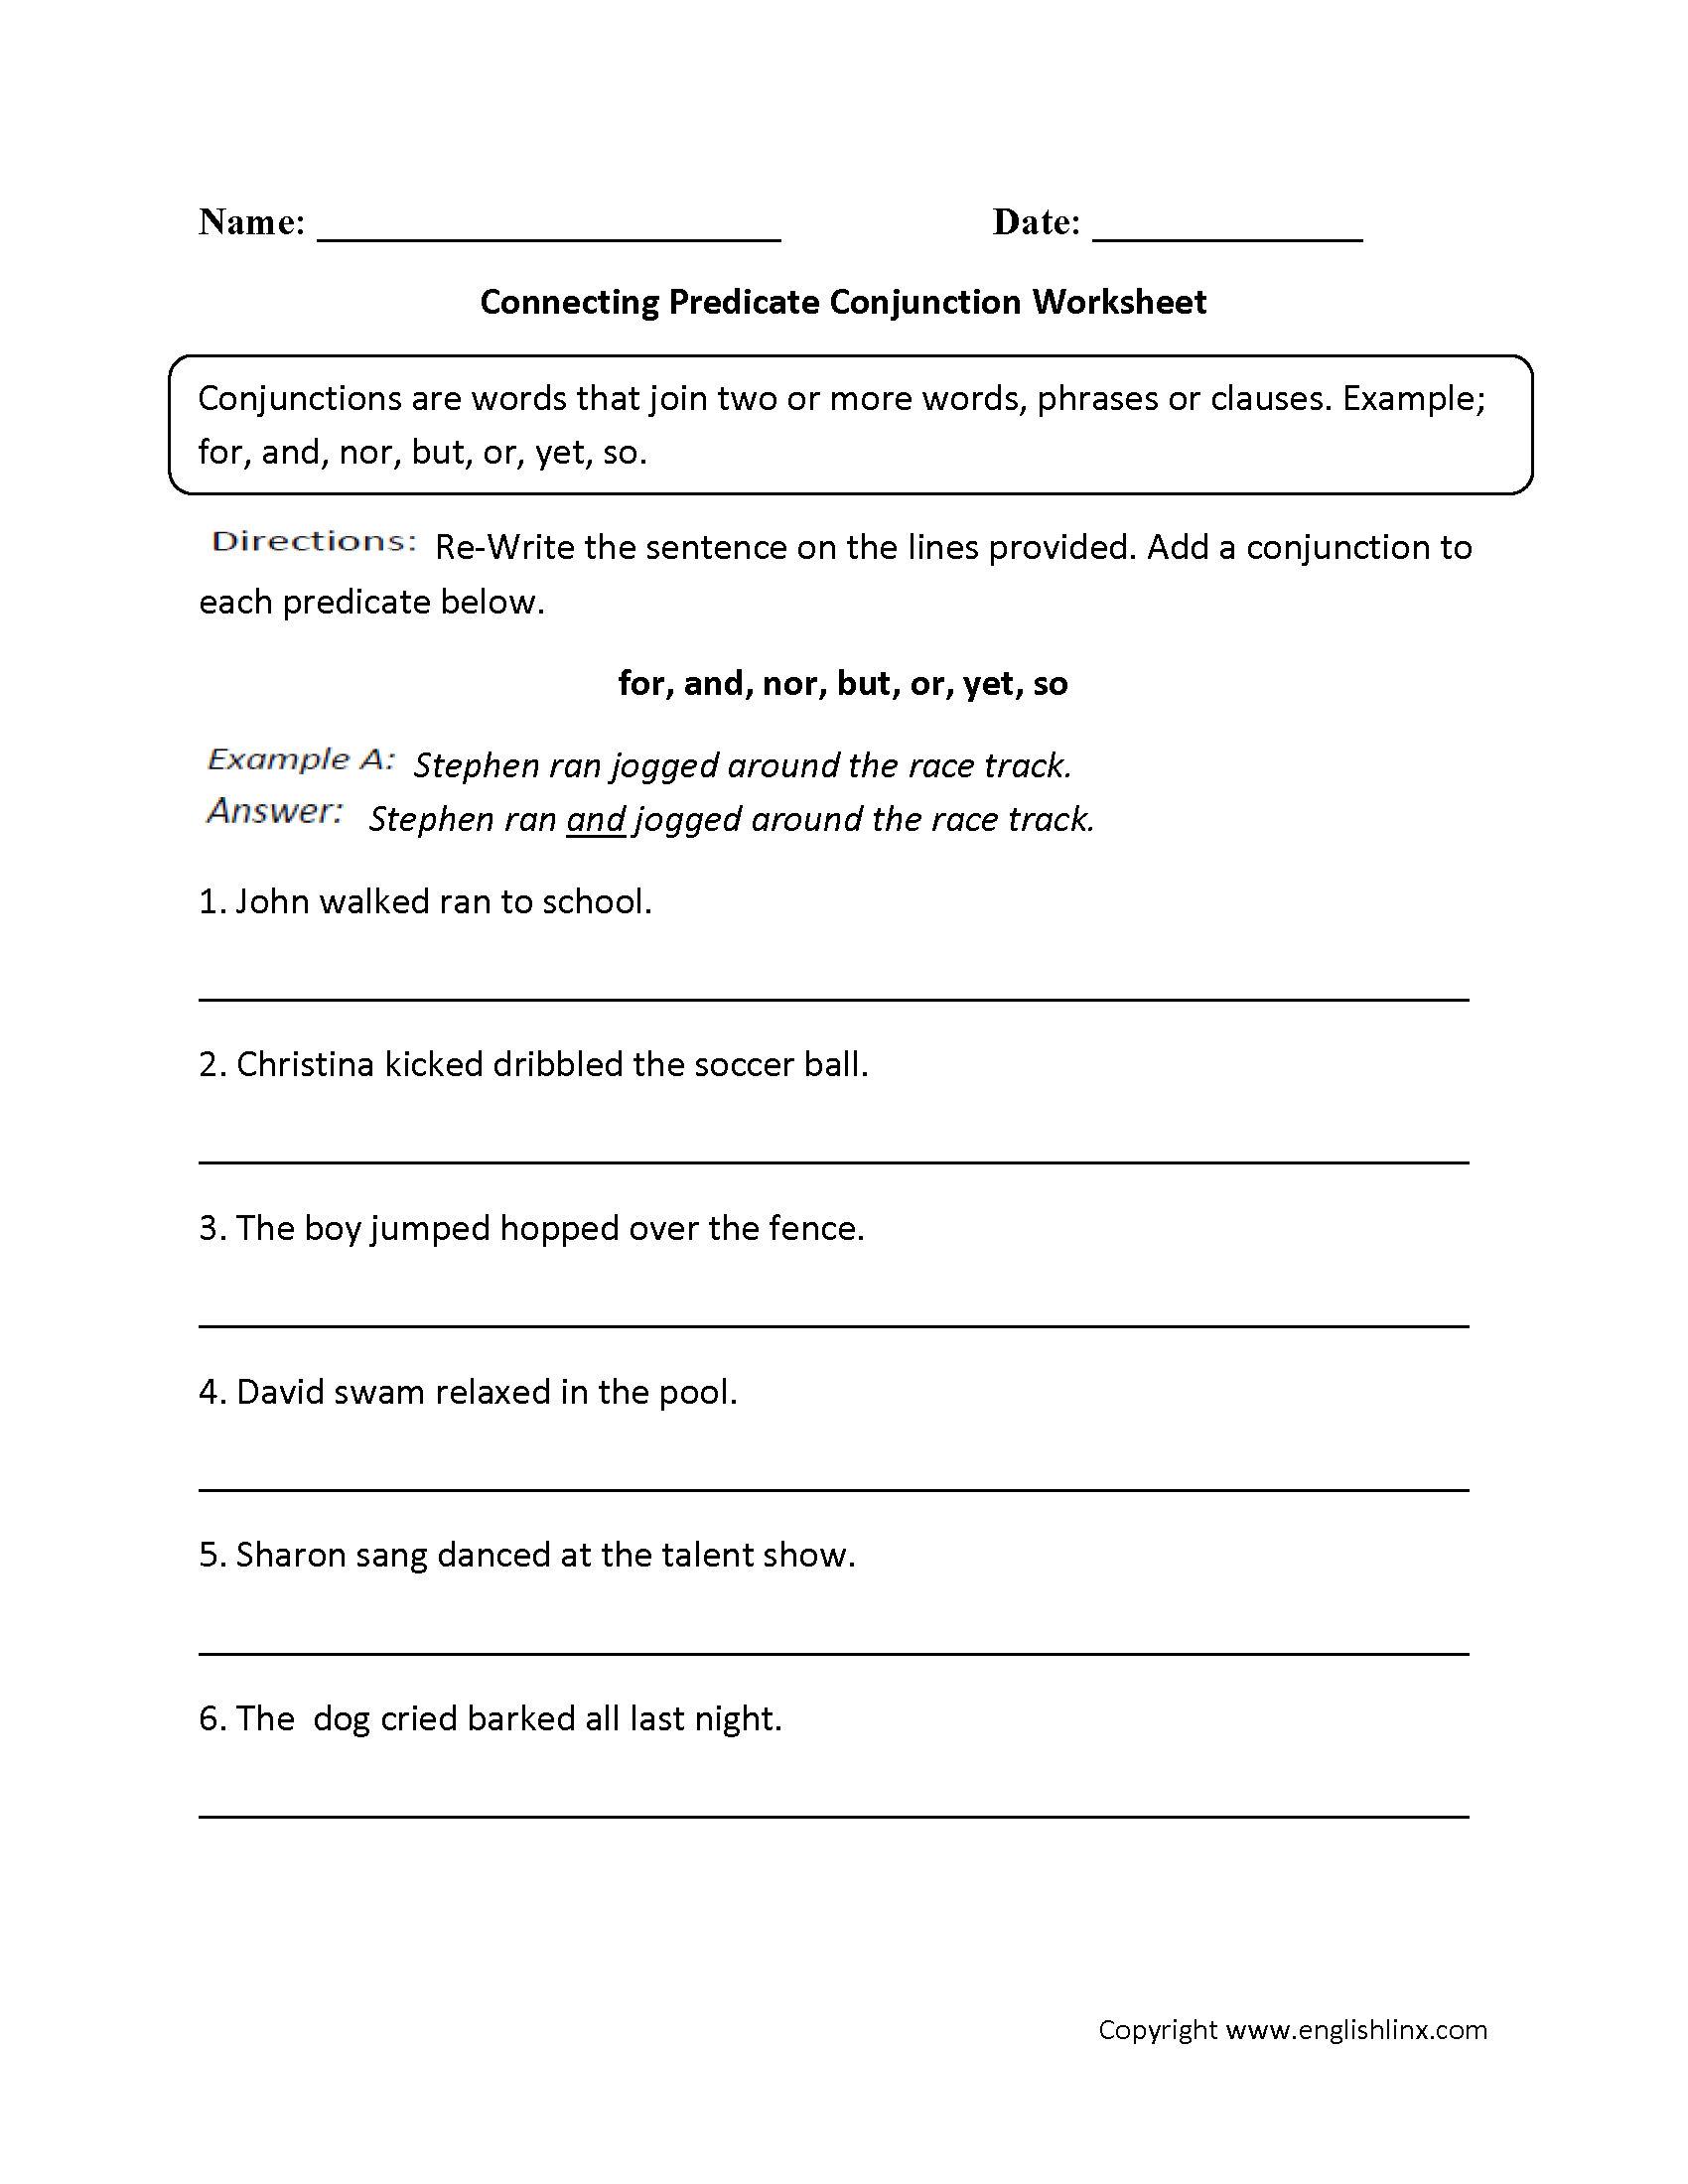 15-best-images-of-parts-of-speech-worksheets-7th-grade-punctuation-worksheets-for-kids